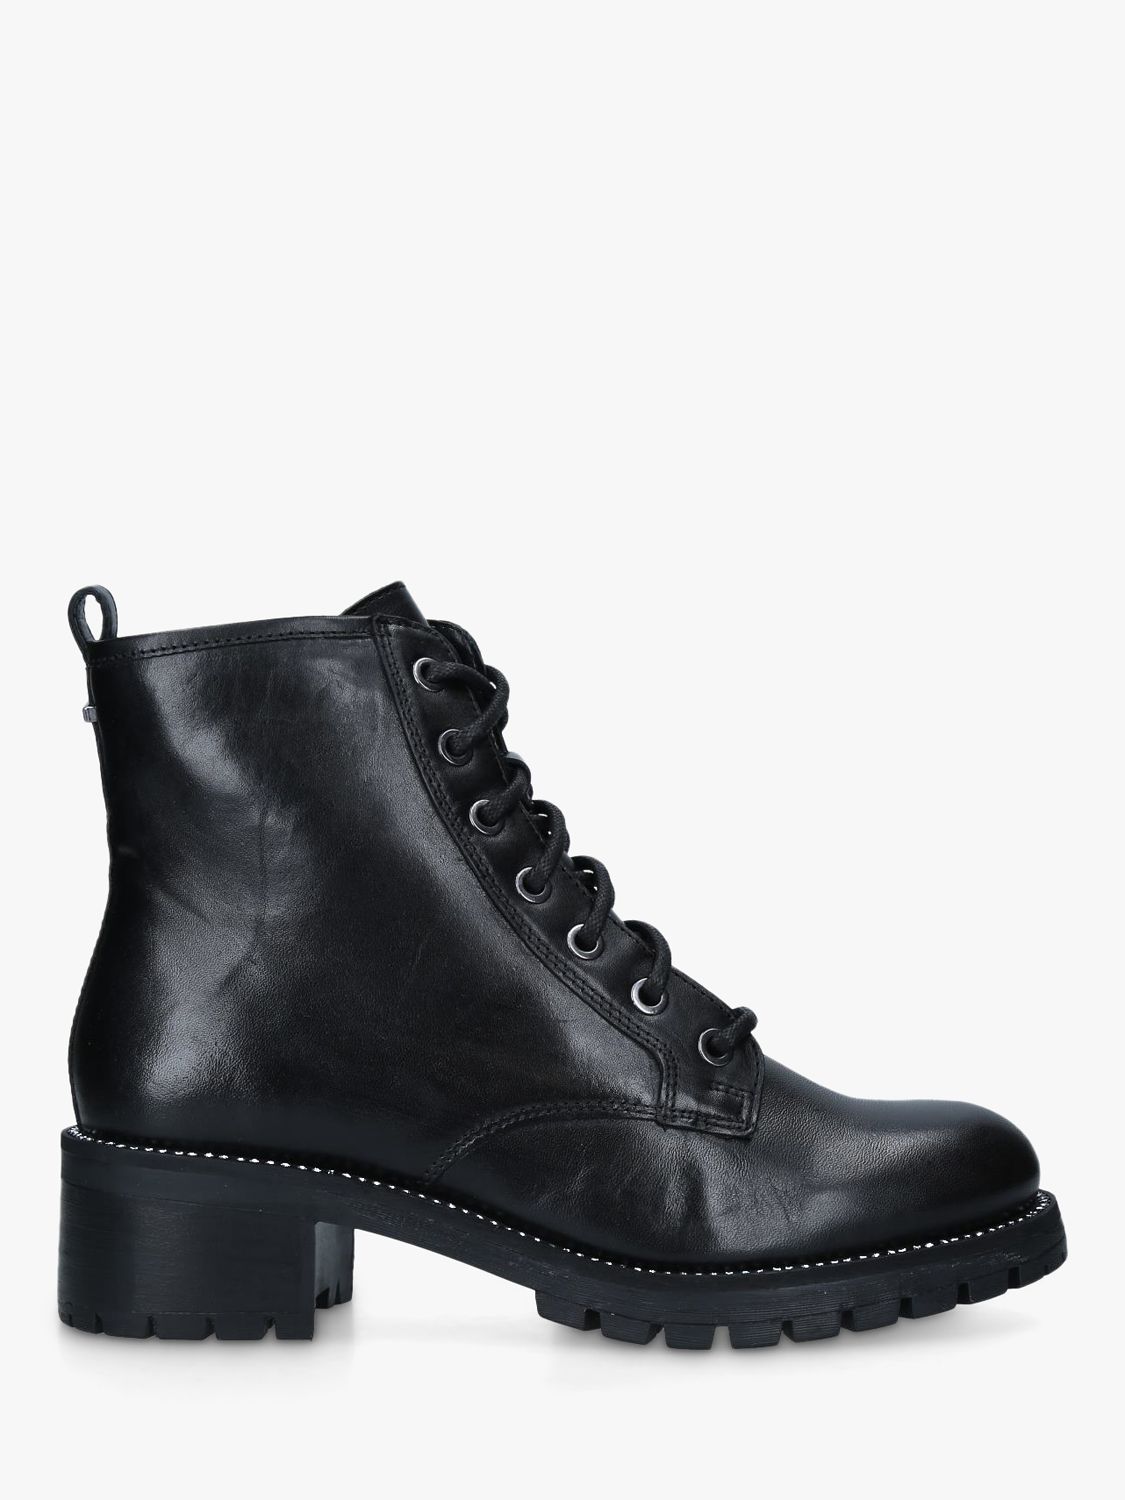 Carvela Treaty Leather Lace Up Ankle Boots, Black